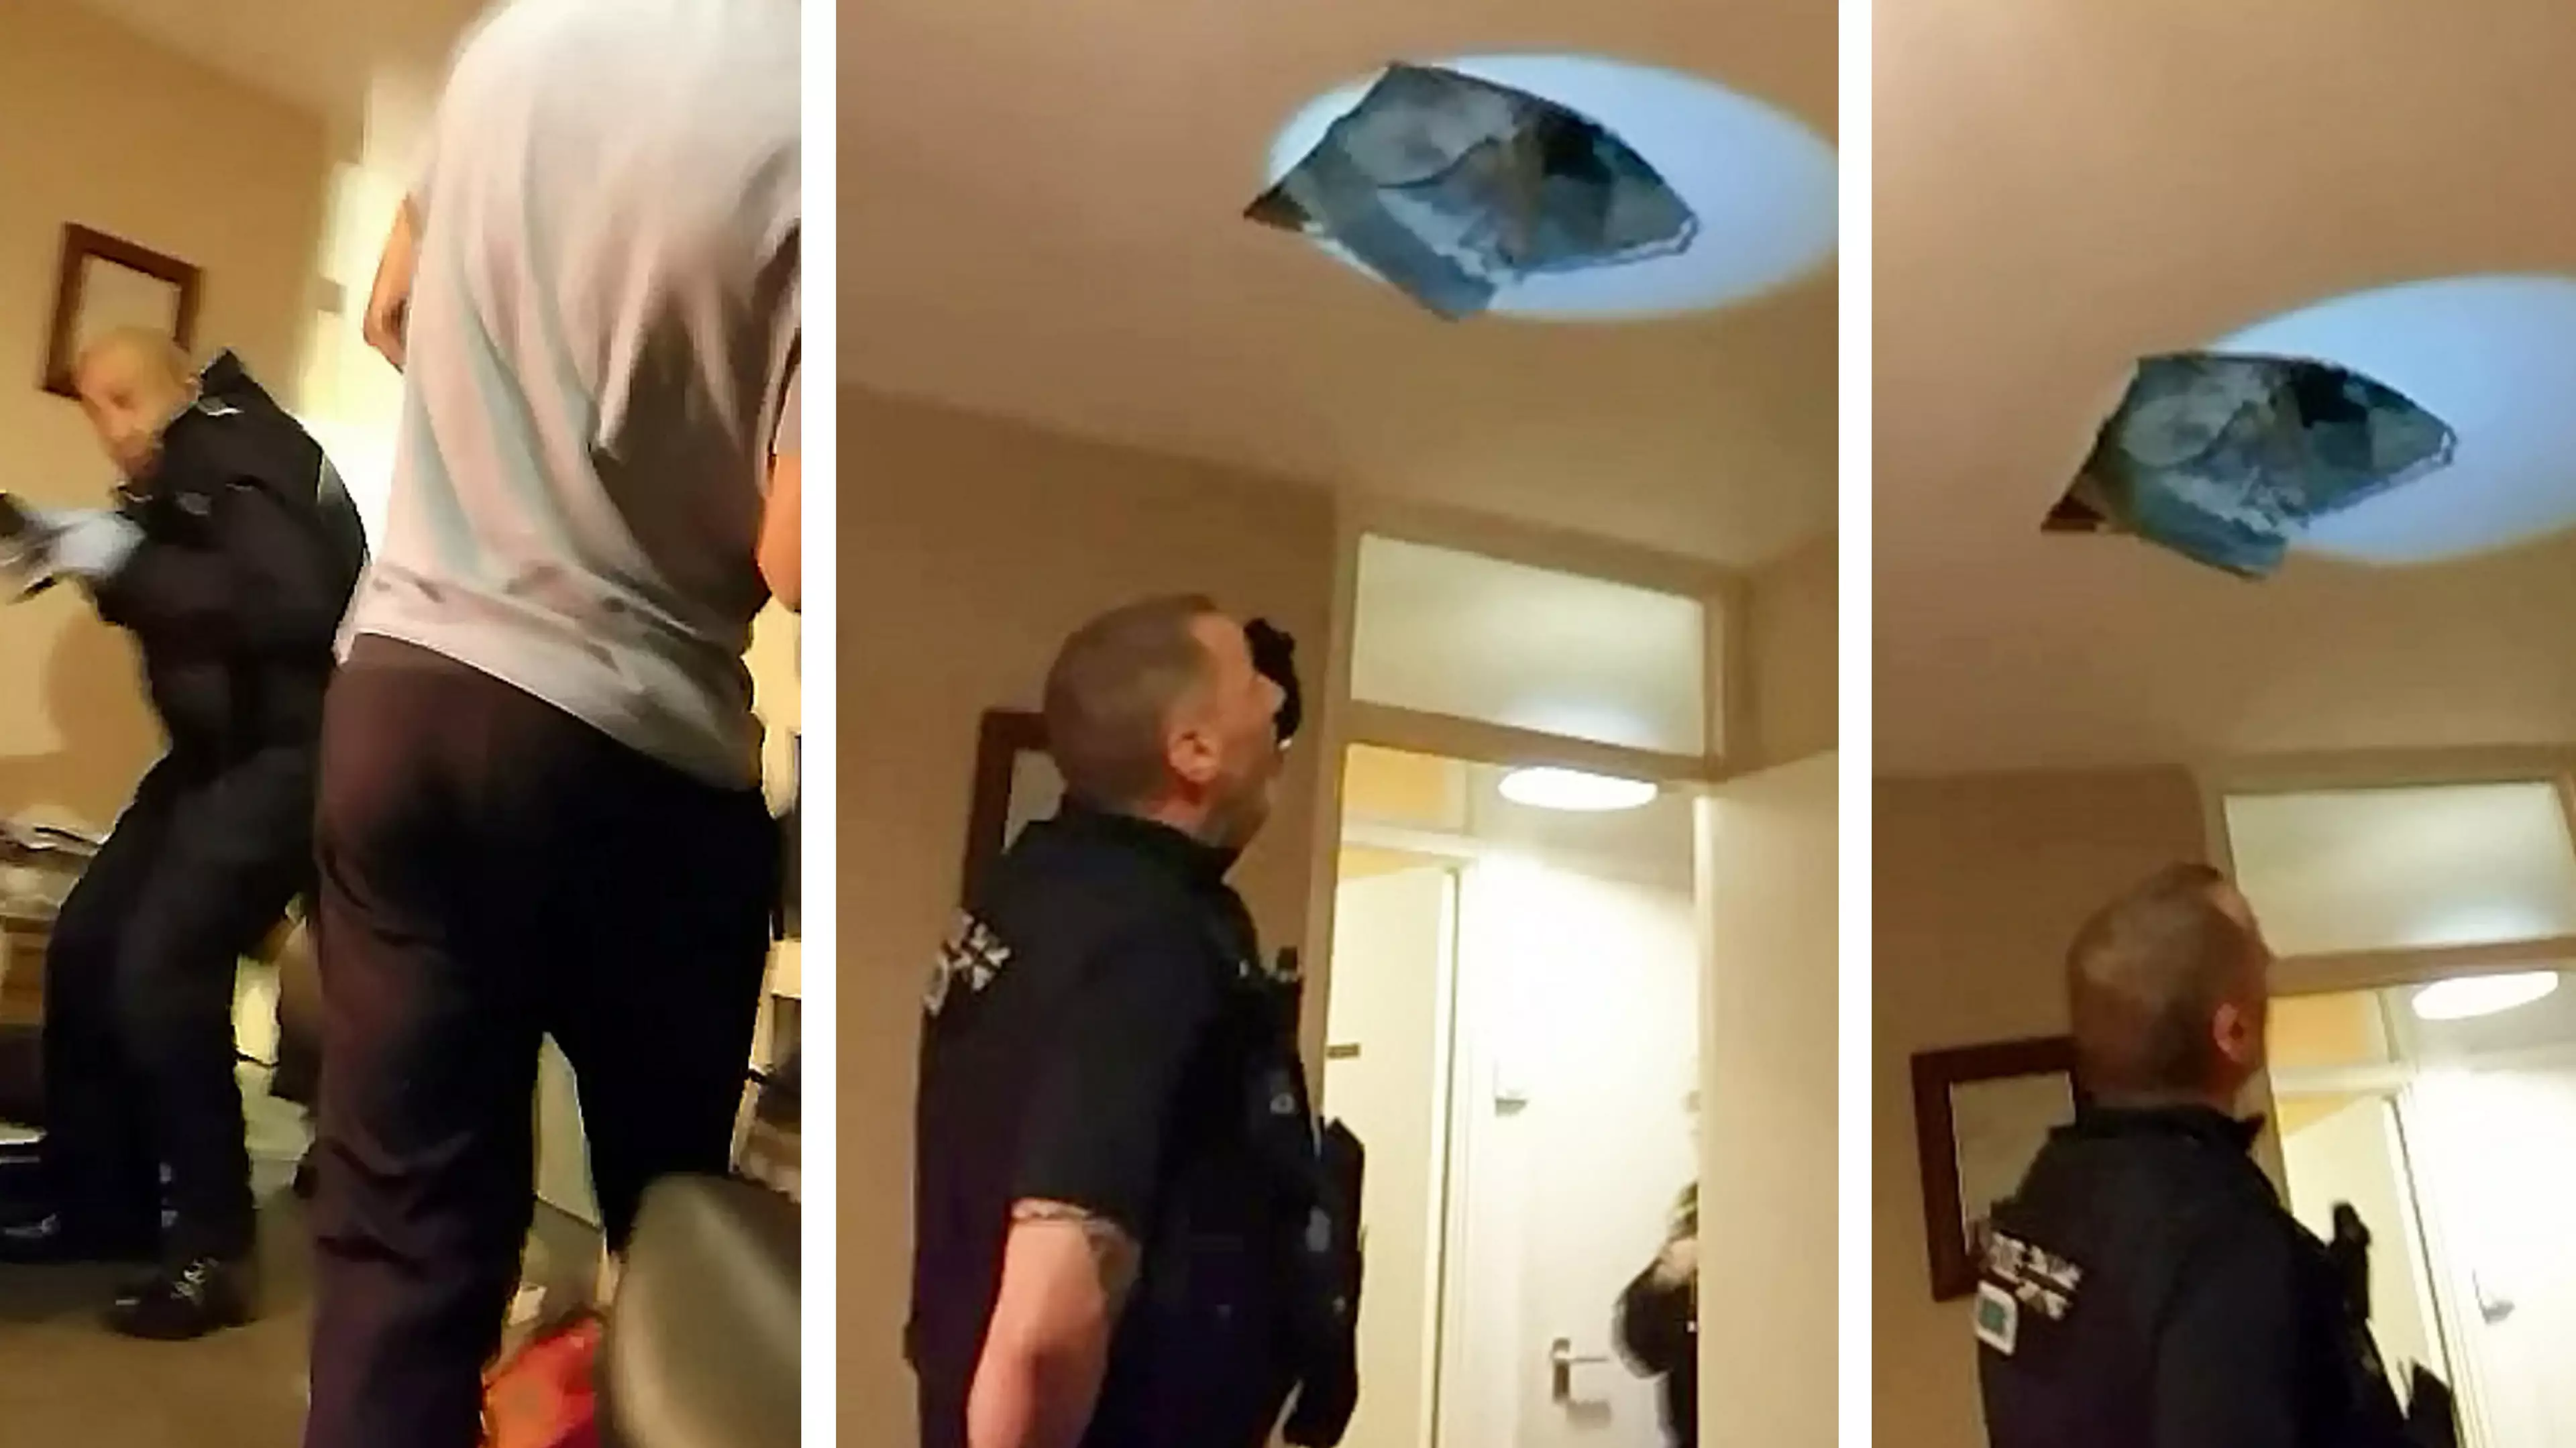 Footage Shows Hiding Suspect Falling Through Ceiling Onto Police Officers